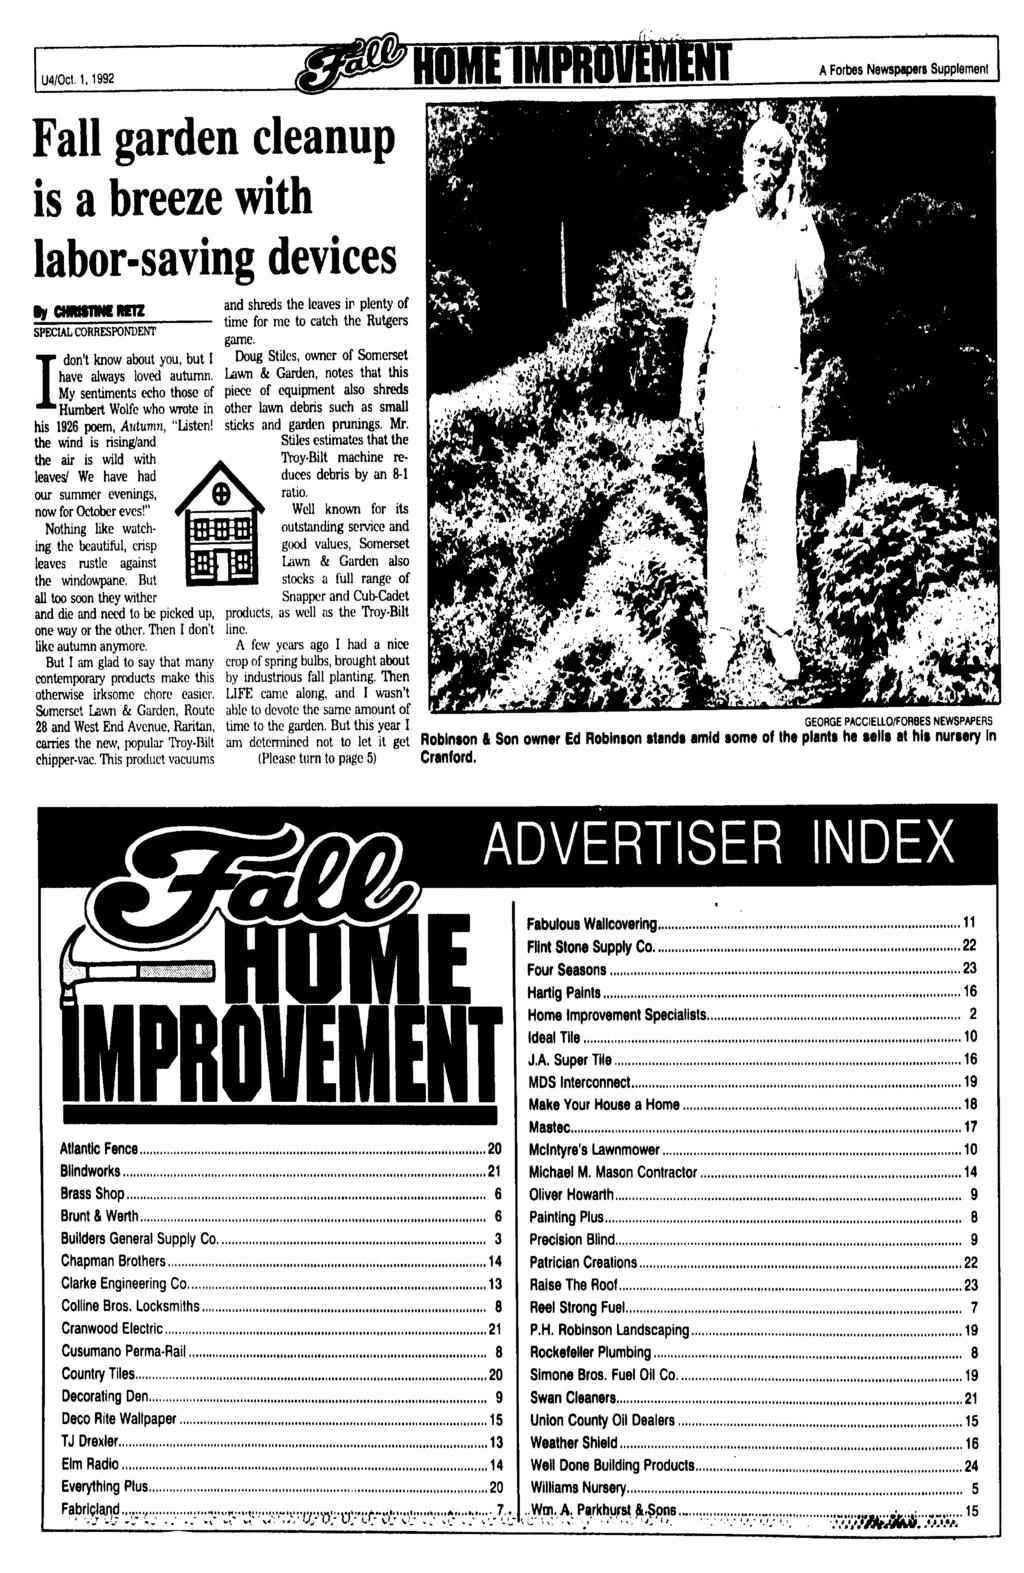 U4/0ct. 1,1992 OMEMPRO A Forbes Newspapers Supplement Fall garden cleanup is a breeze with labor-saving devices y CHMSTMEREVZ SPECAL CORRESPONDENT don't know about you, but! have always loved autumn.